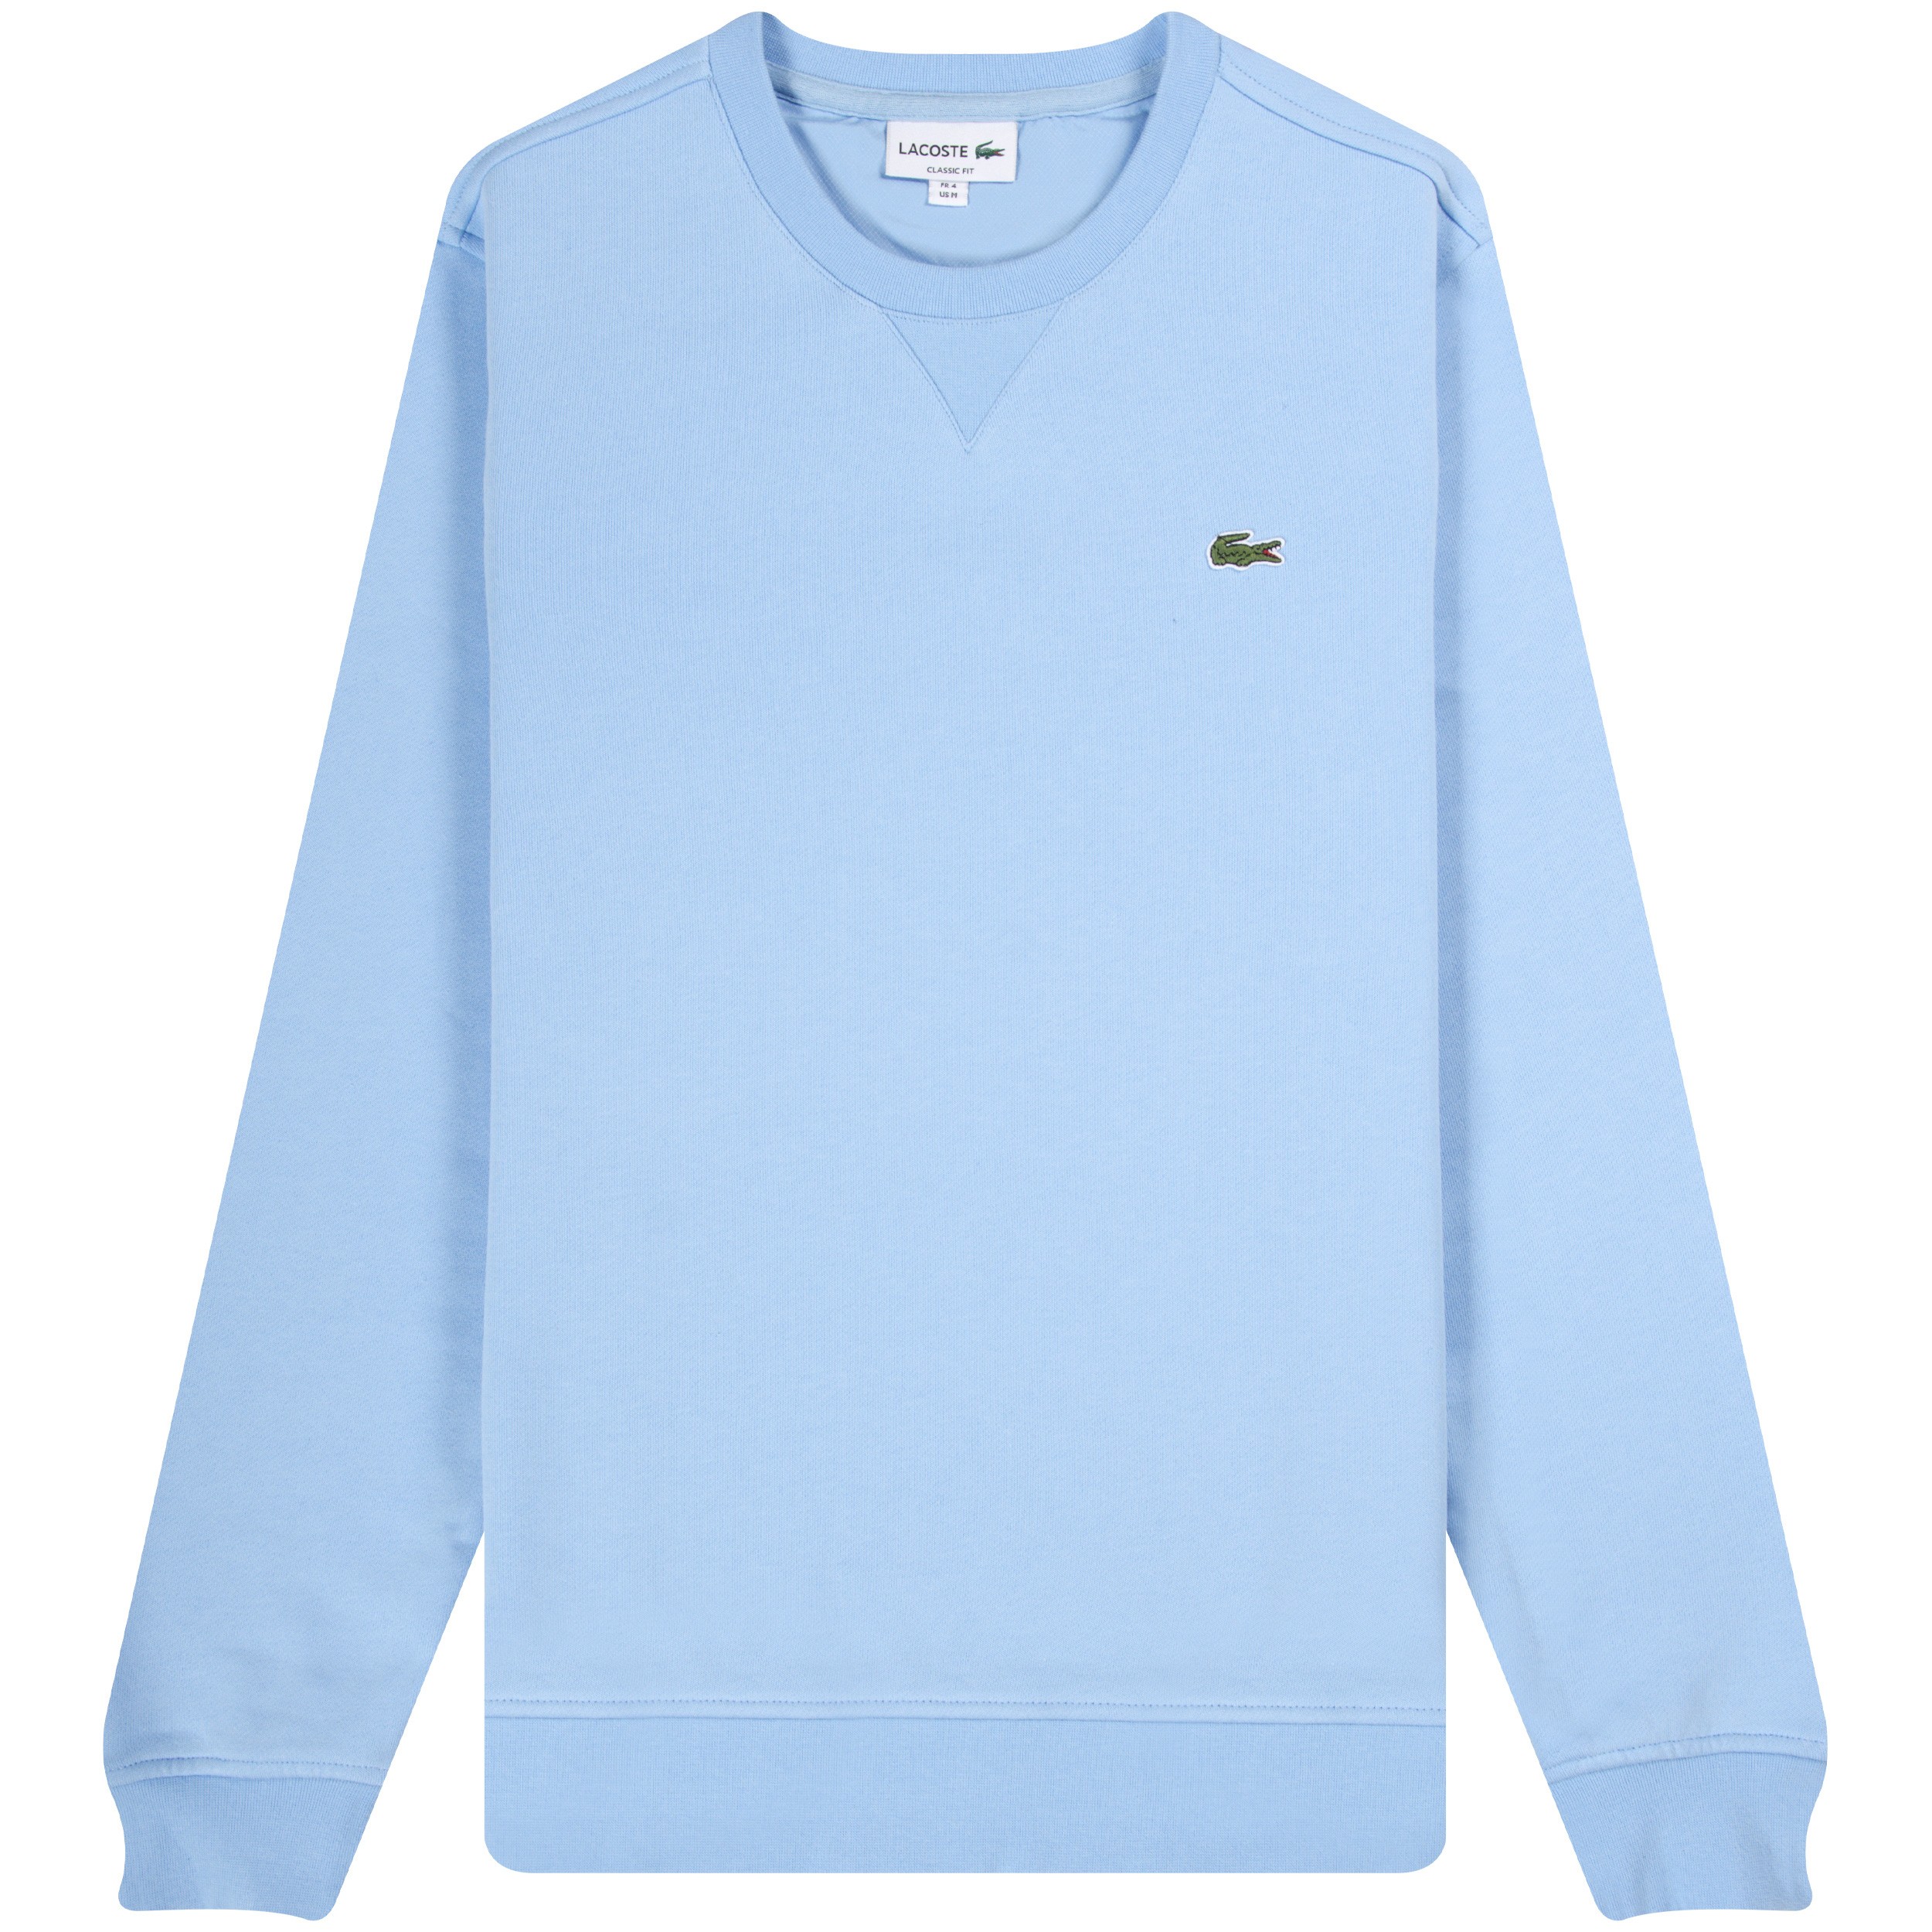 Lacoste Sweater For Man | escapeauthority.com